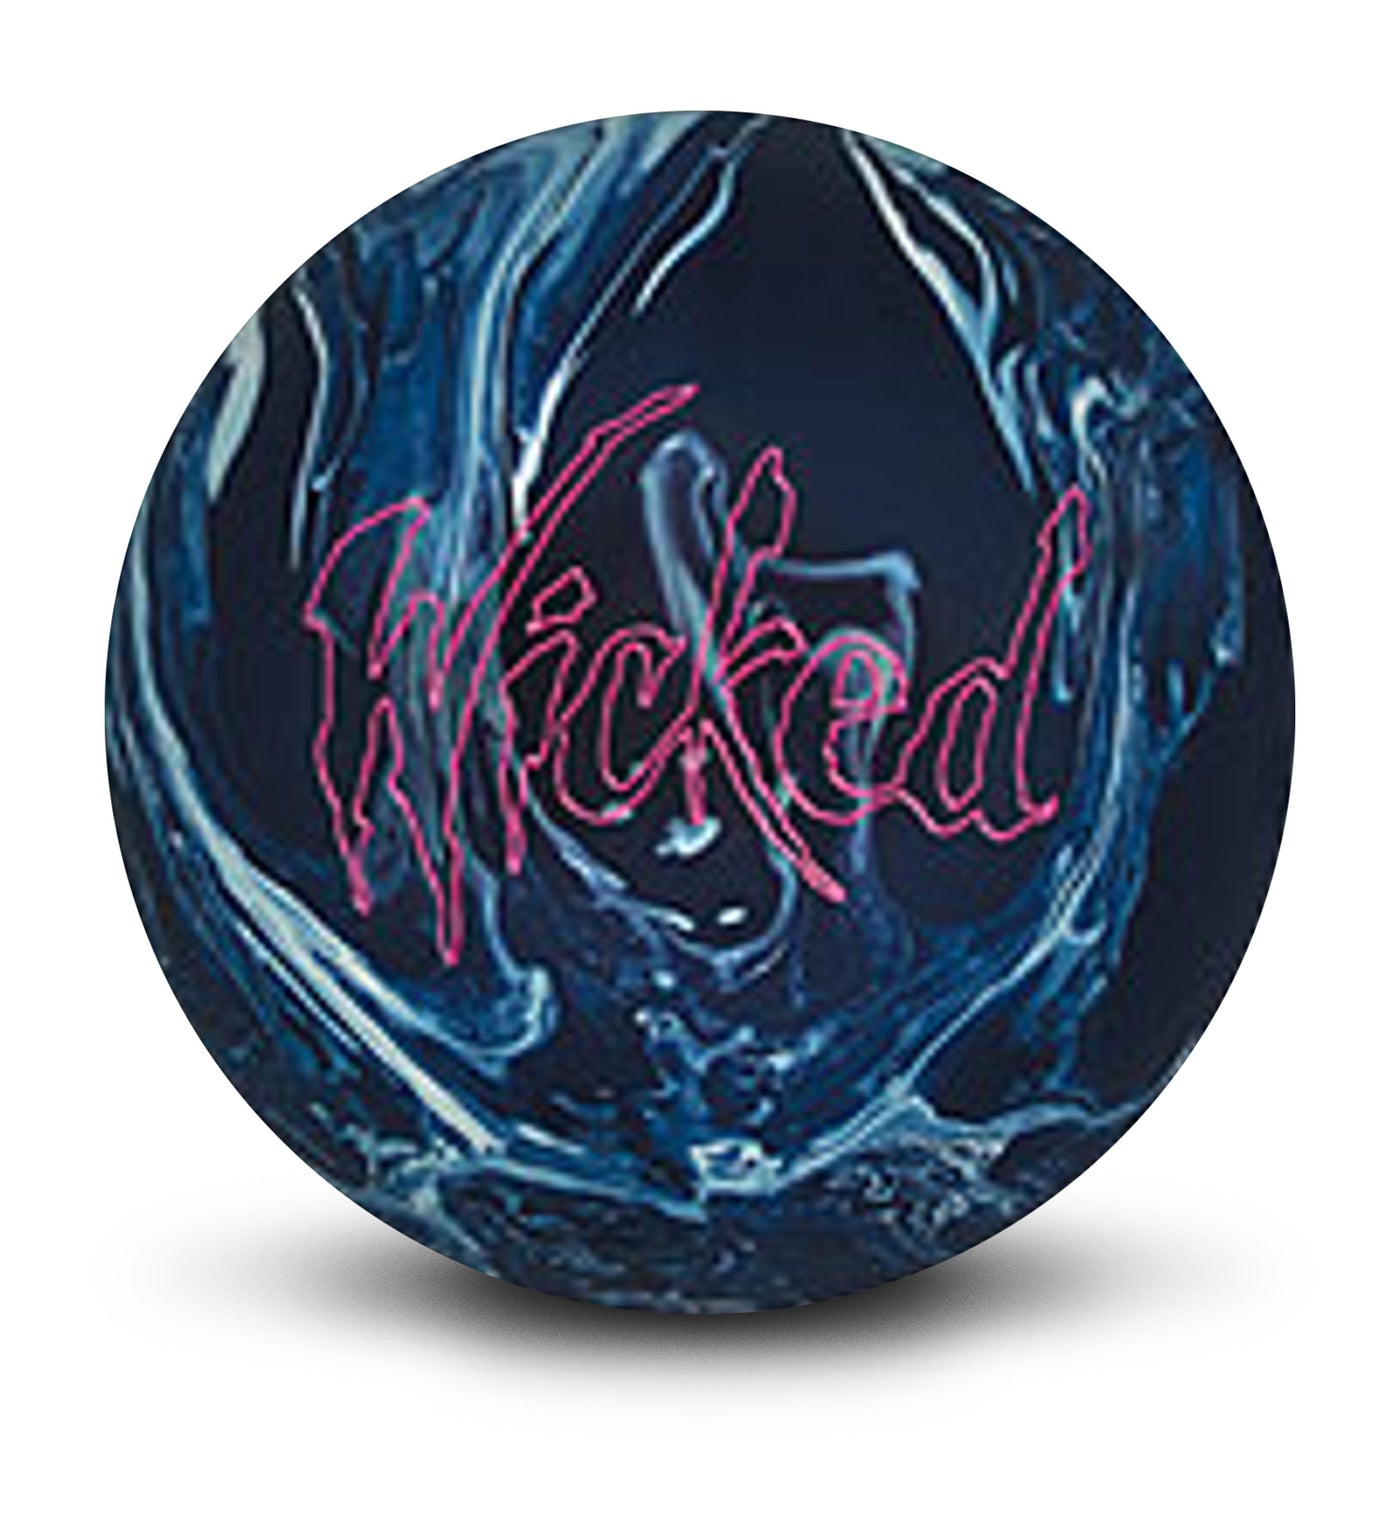 Wicked bowling ball